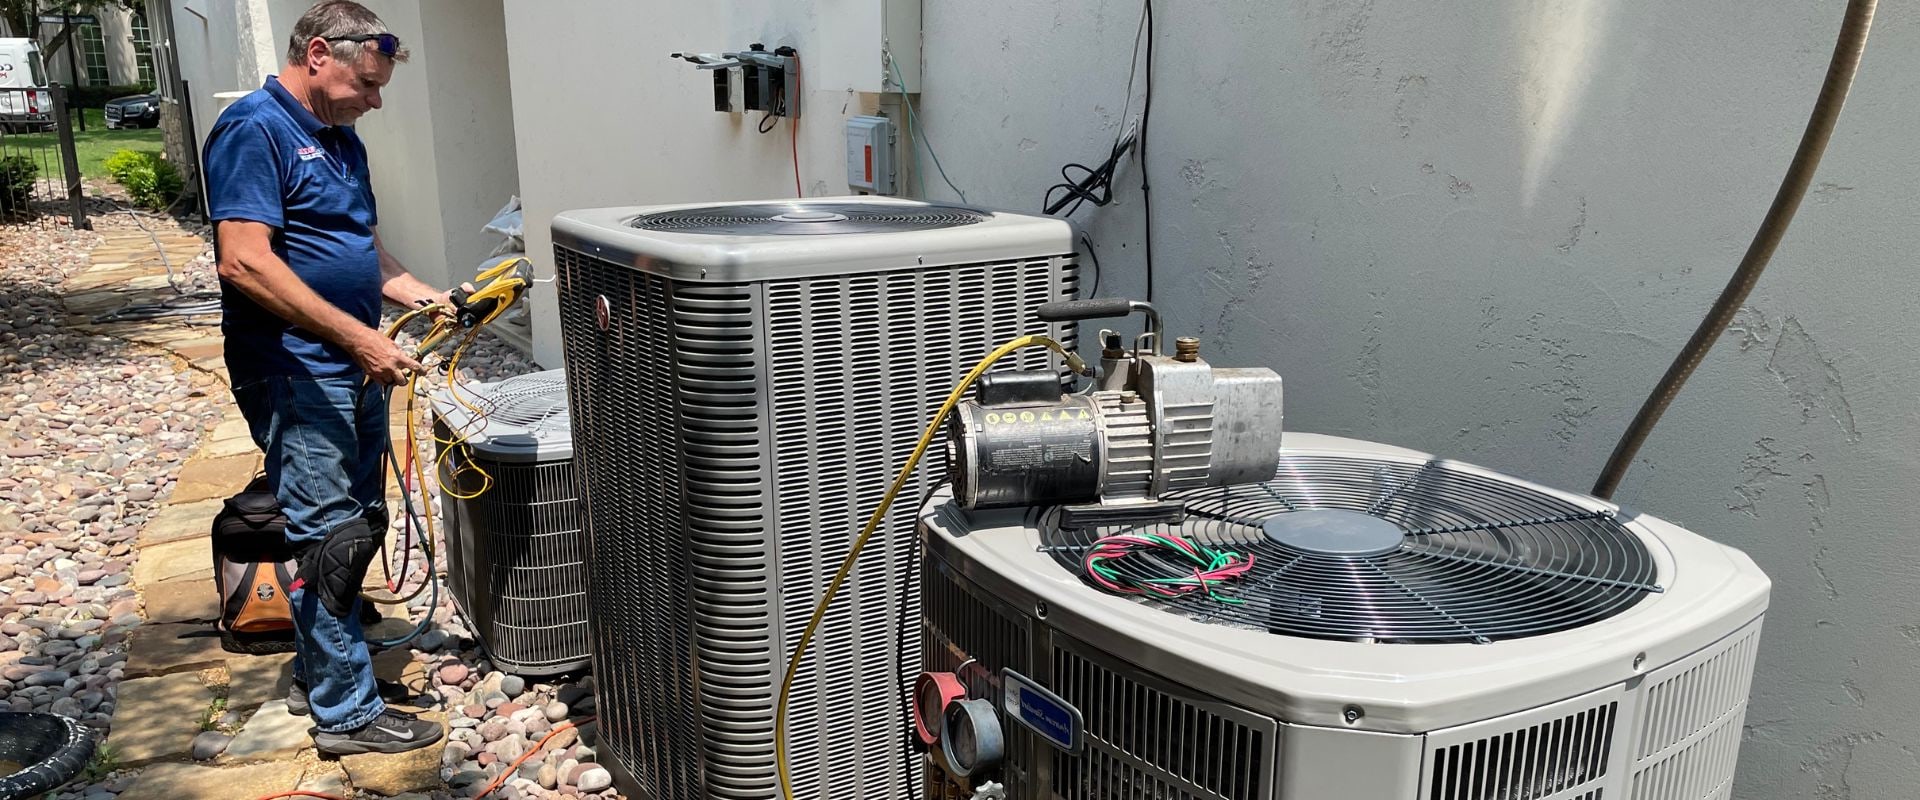 Save On Energy Bills With Professional HVAC Tune up Service